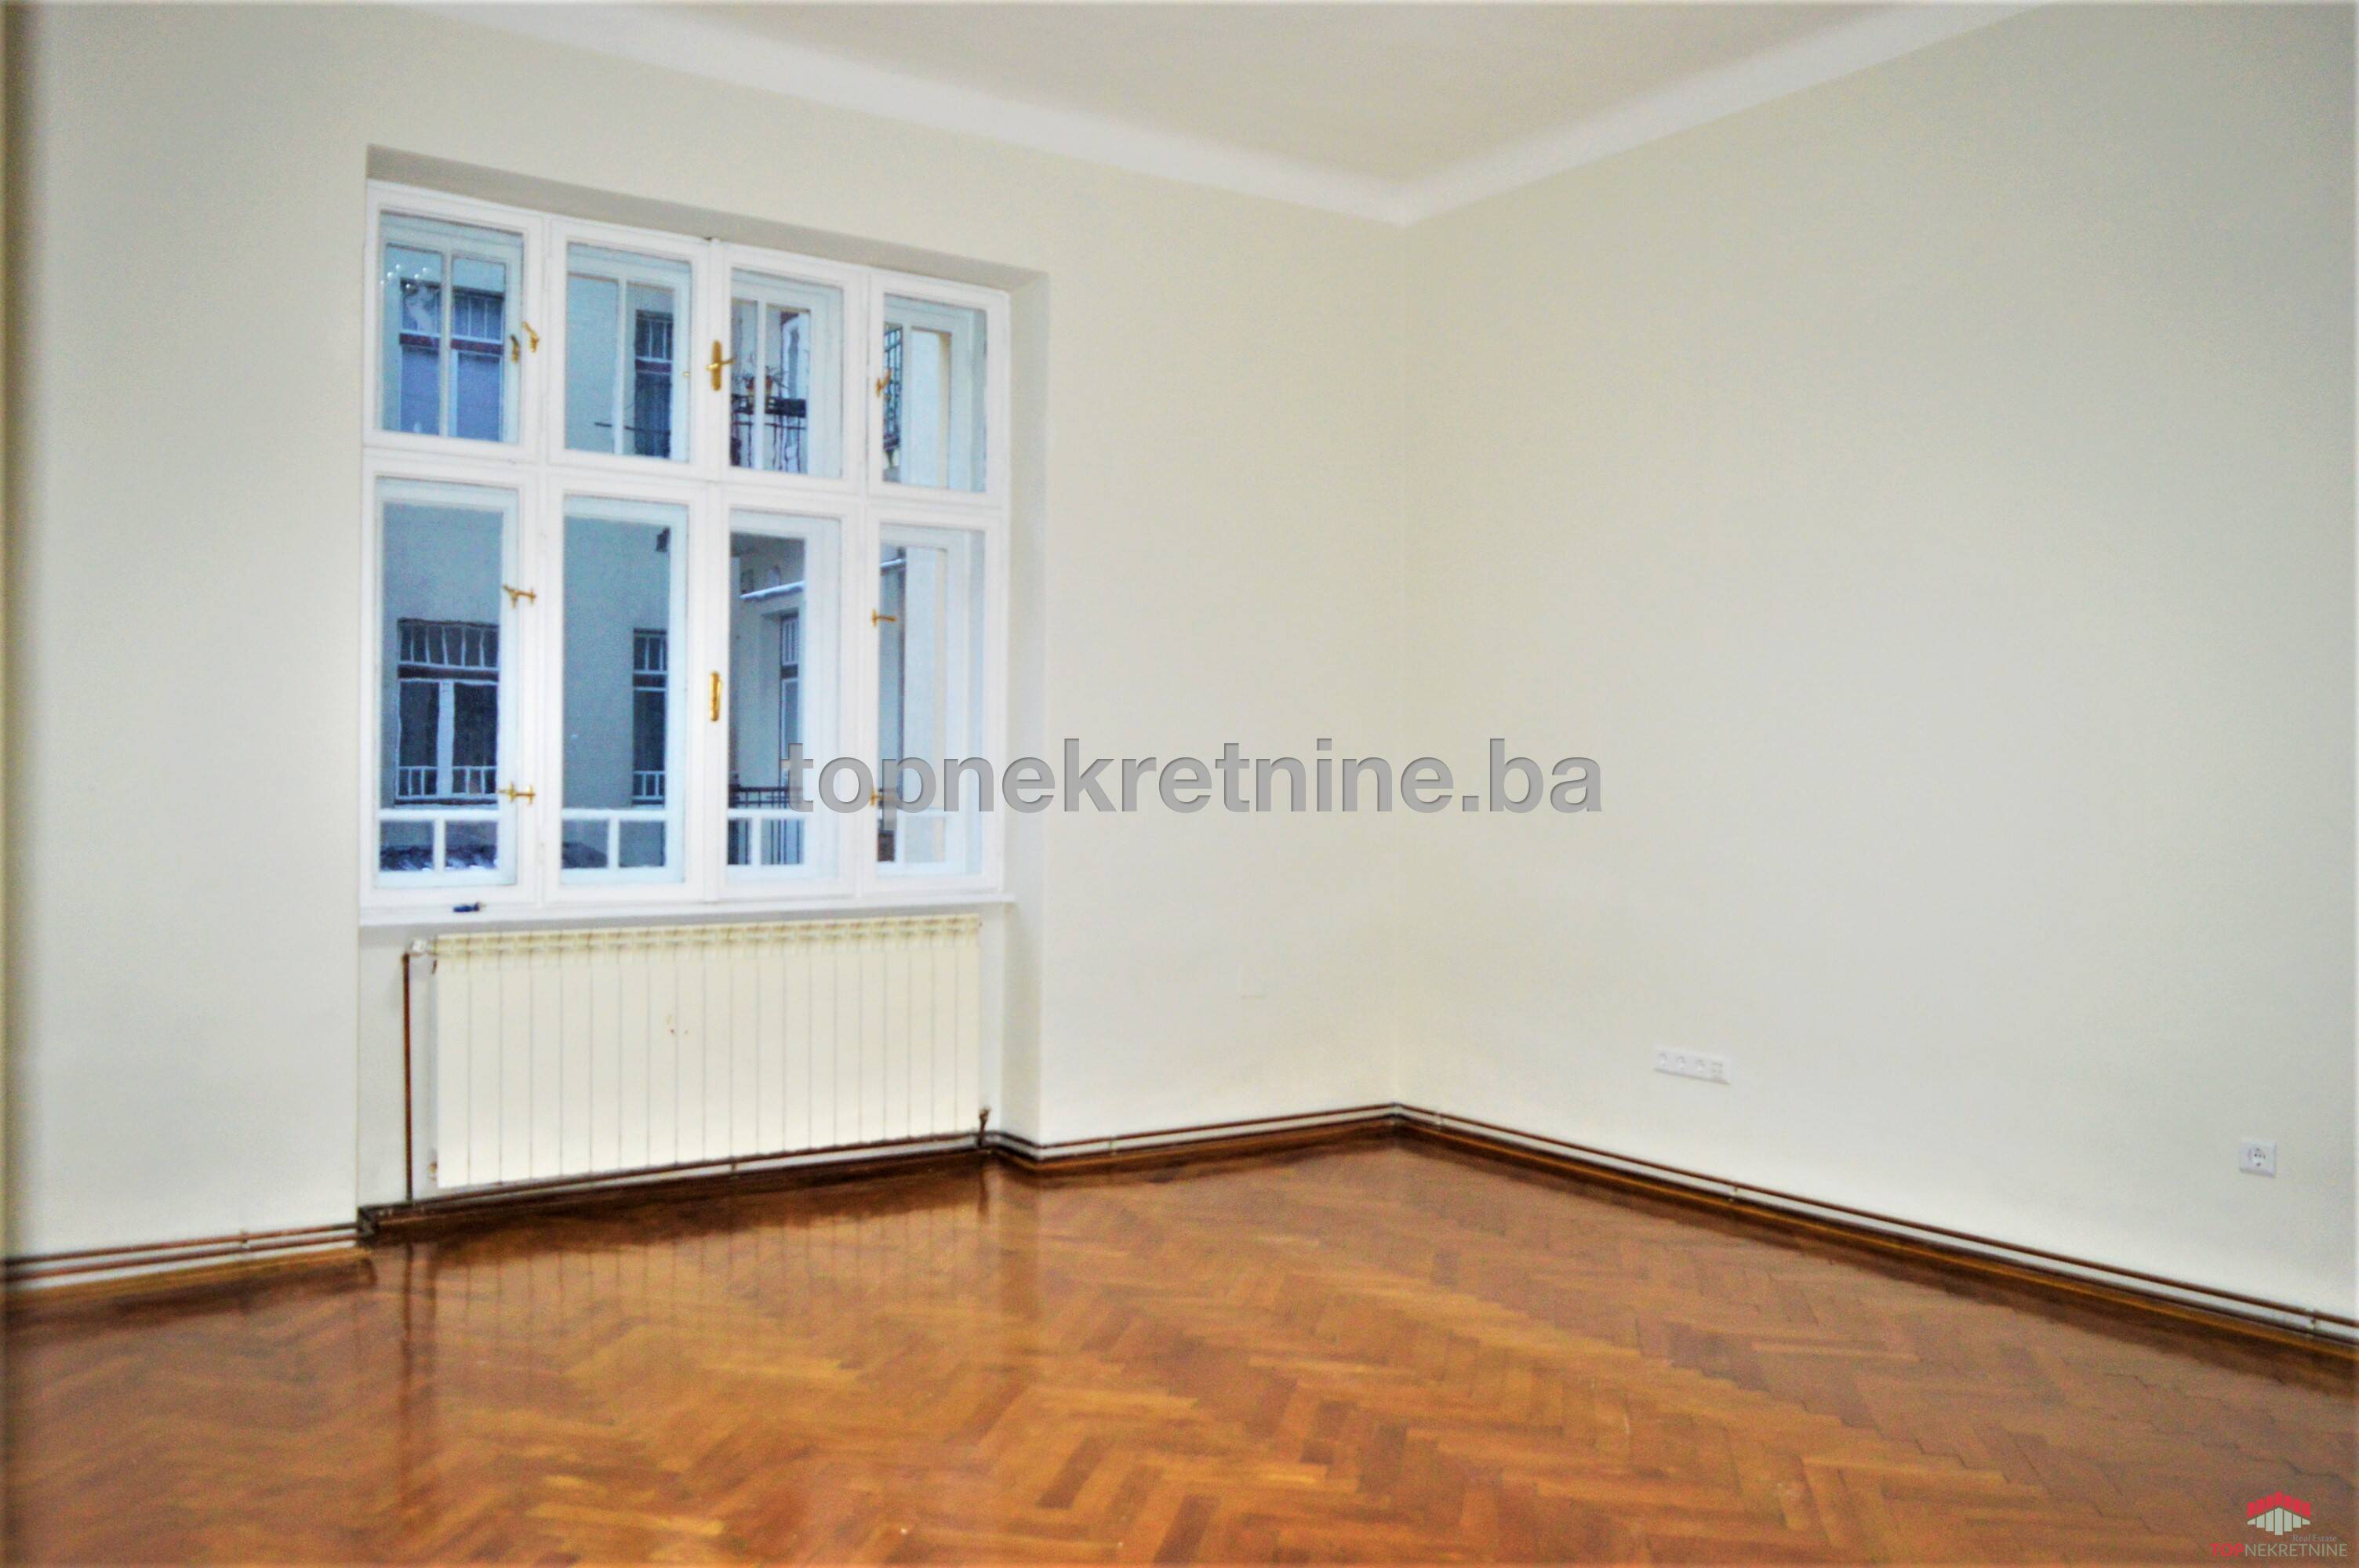 Spacious apartment with 92 SqM, with a bacony, 2nd floor, near Marketplace Markale